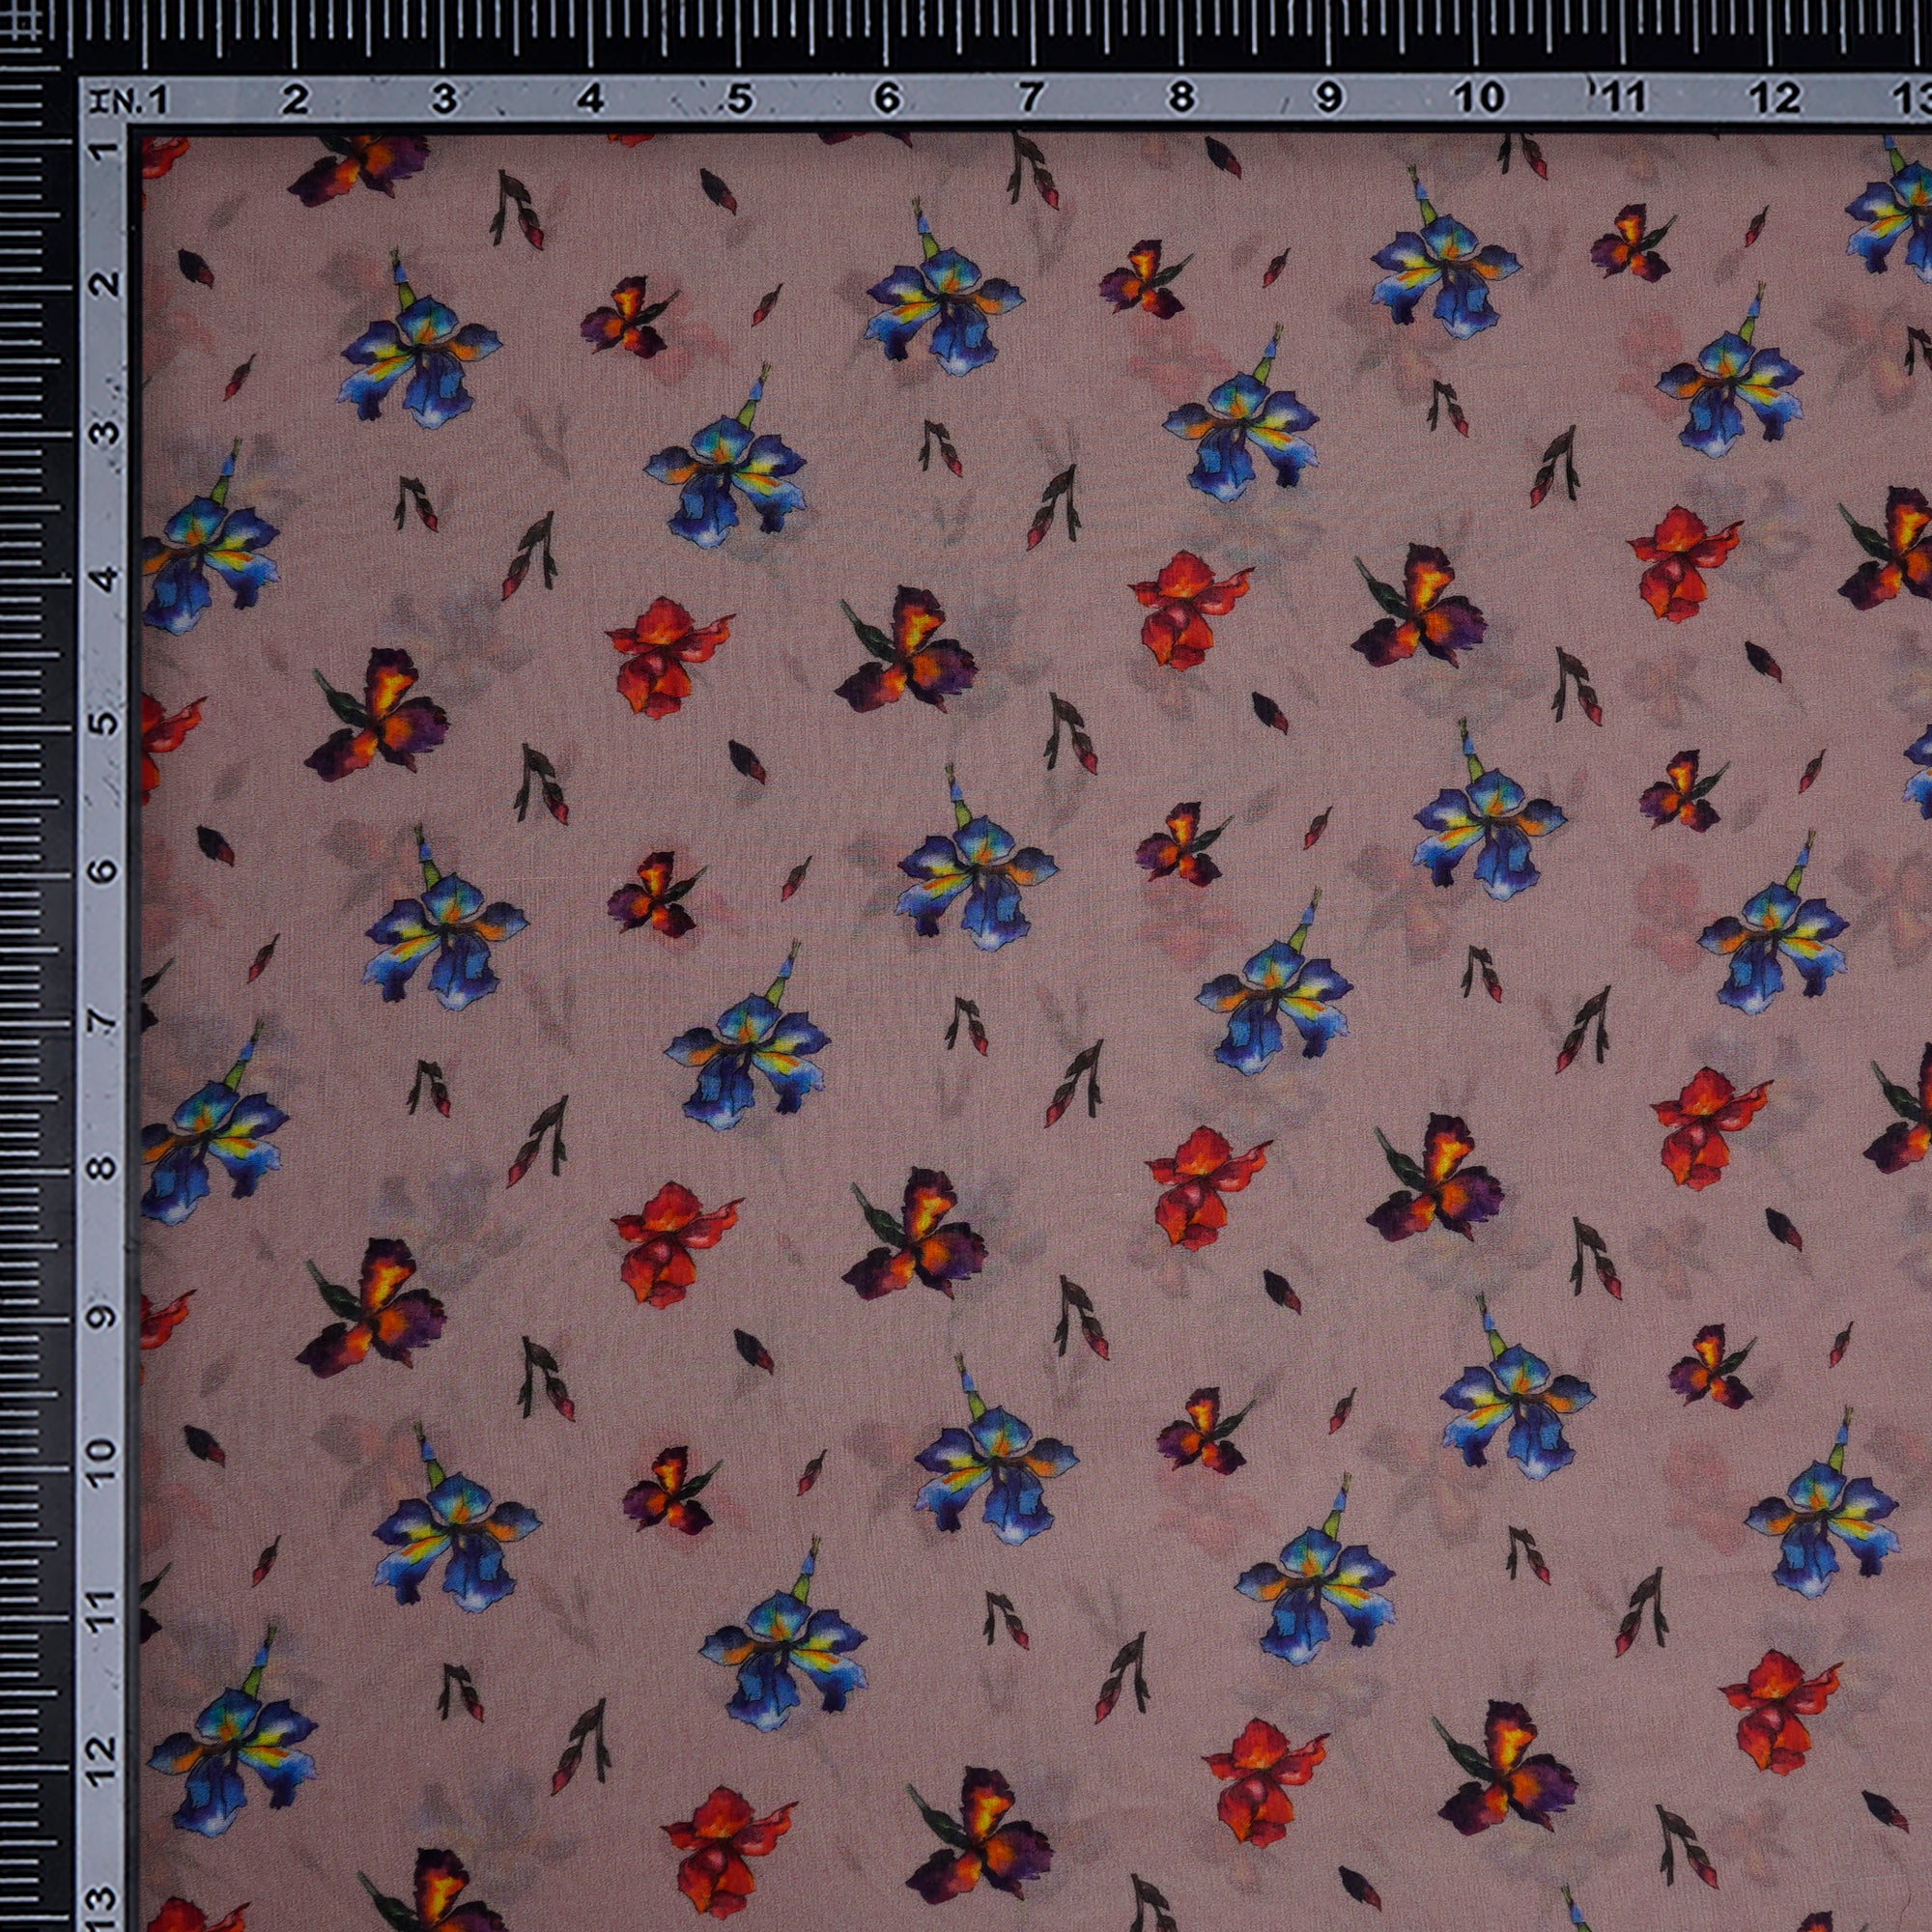 Baby Pink Floral Pattern Digital Print Wrinkle Cotton Fabric